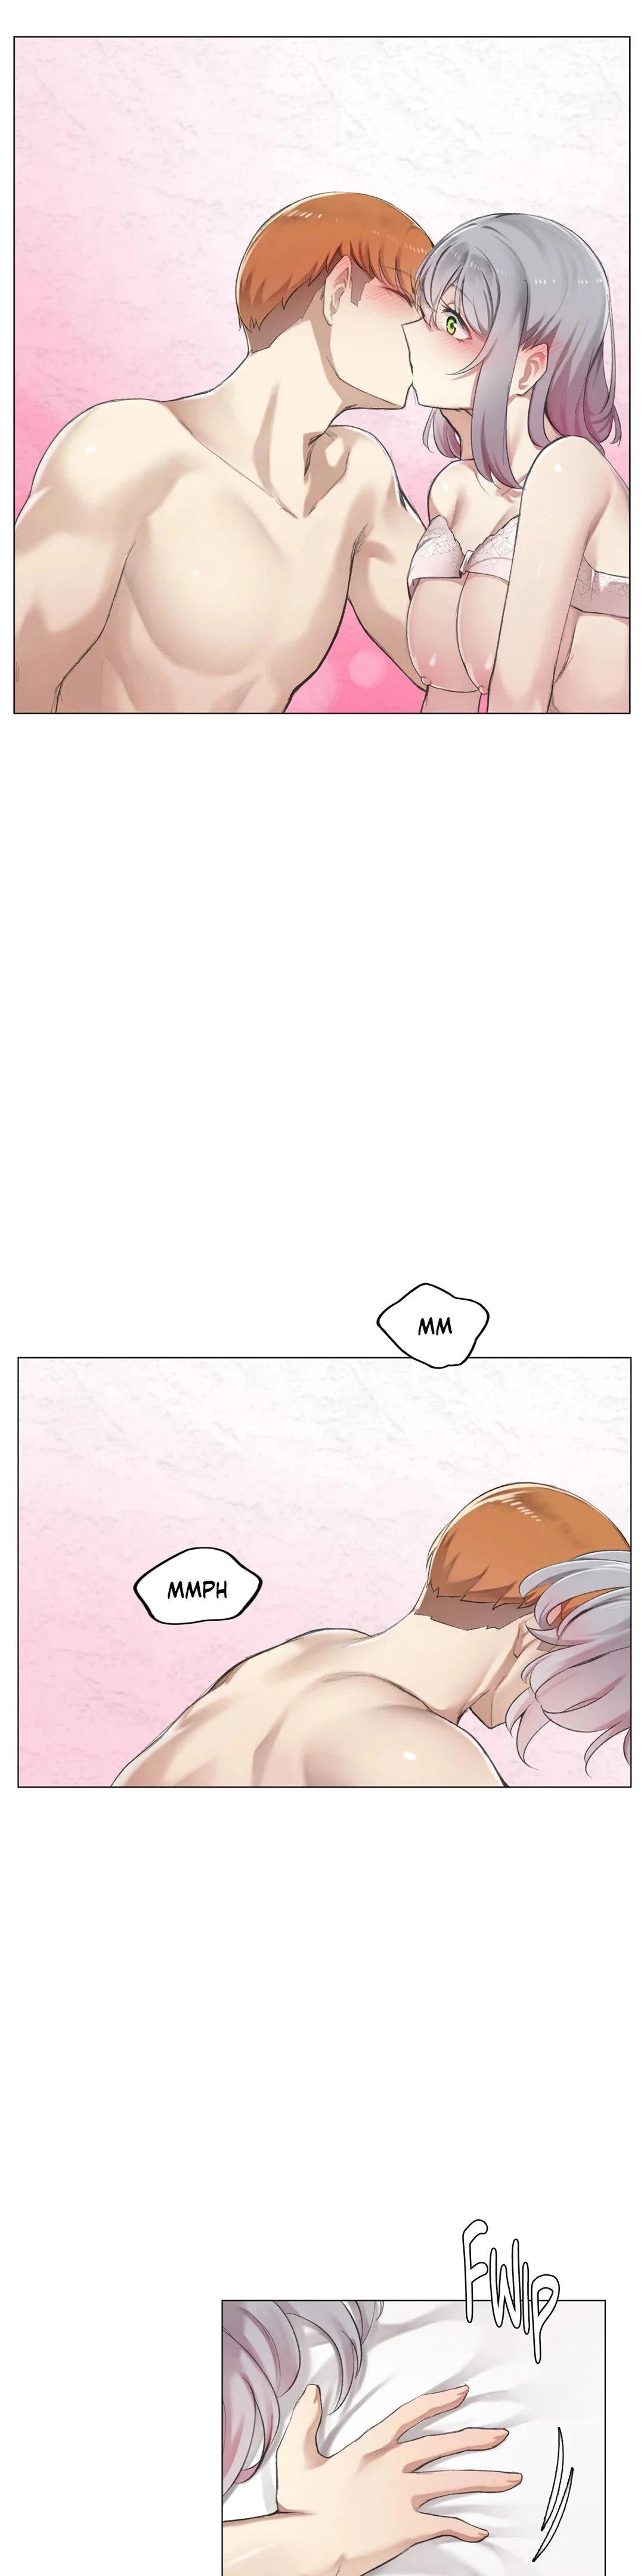 [Dumangoon, KONG_] Sexcape Room: Snap Off Ch.7/7 [English] [Manhwa PDF] Completed 191